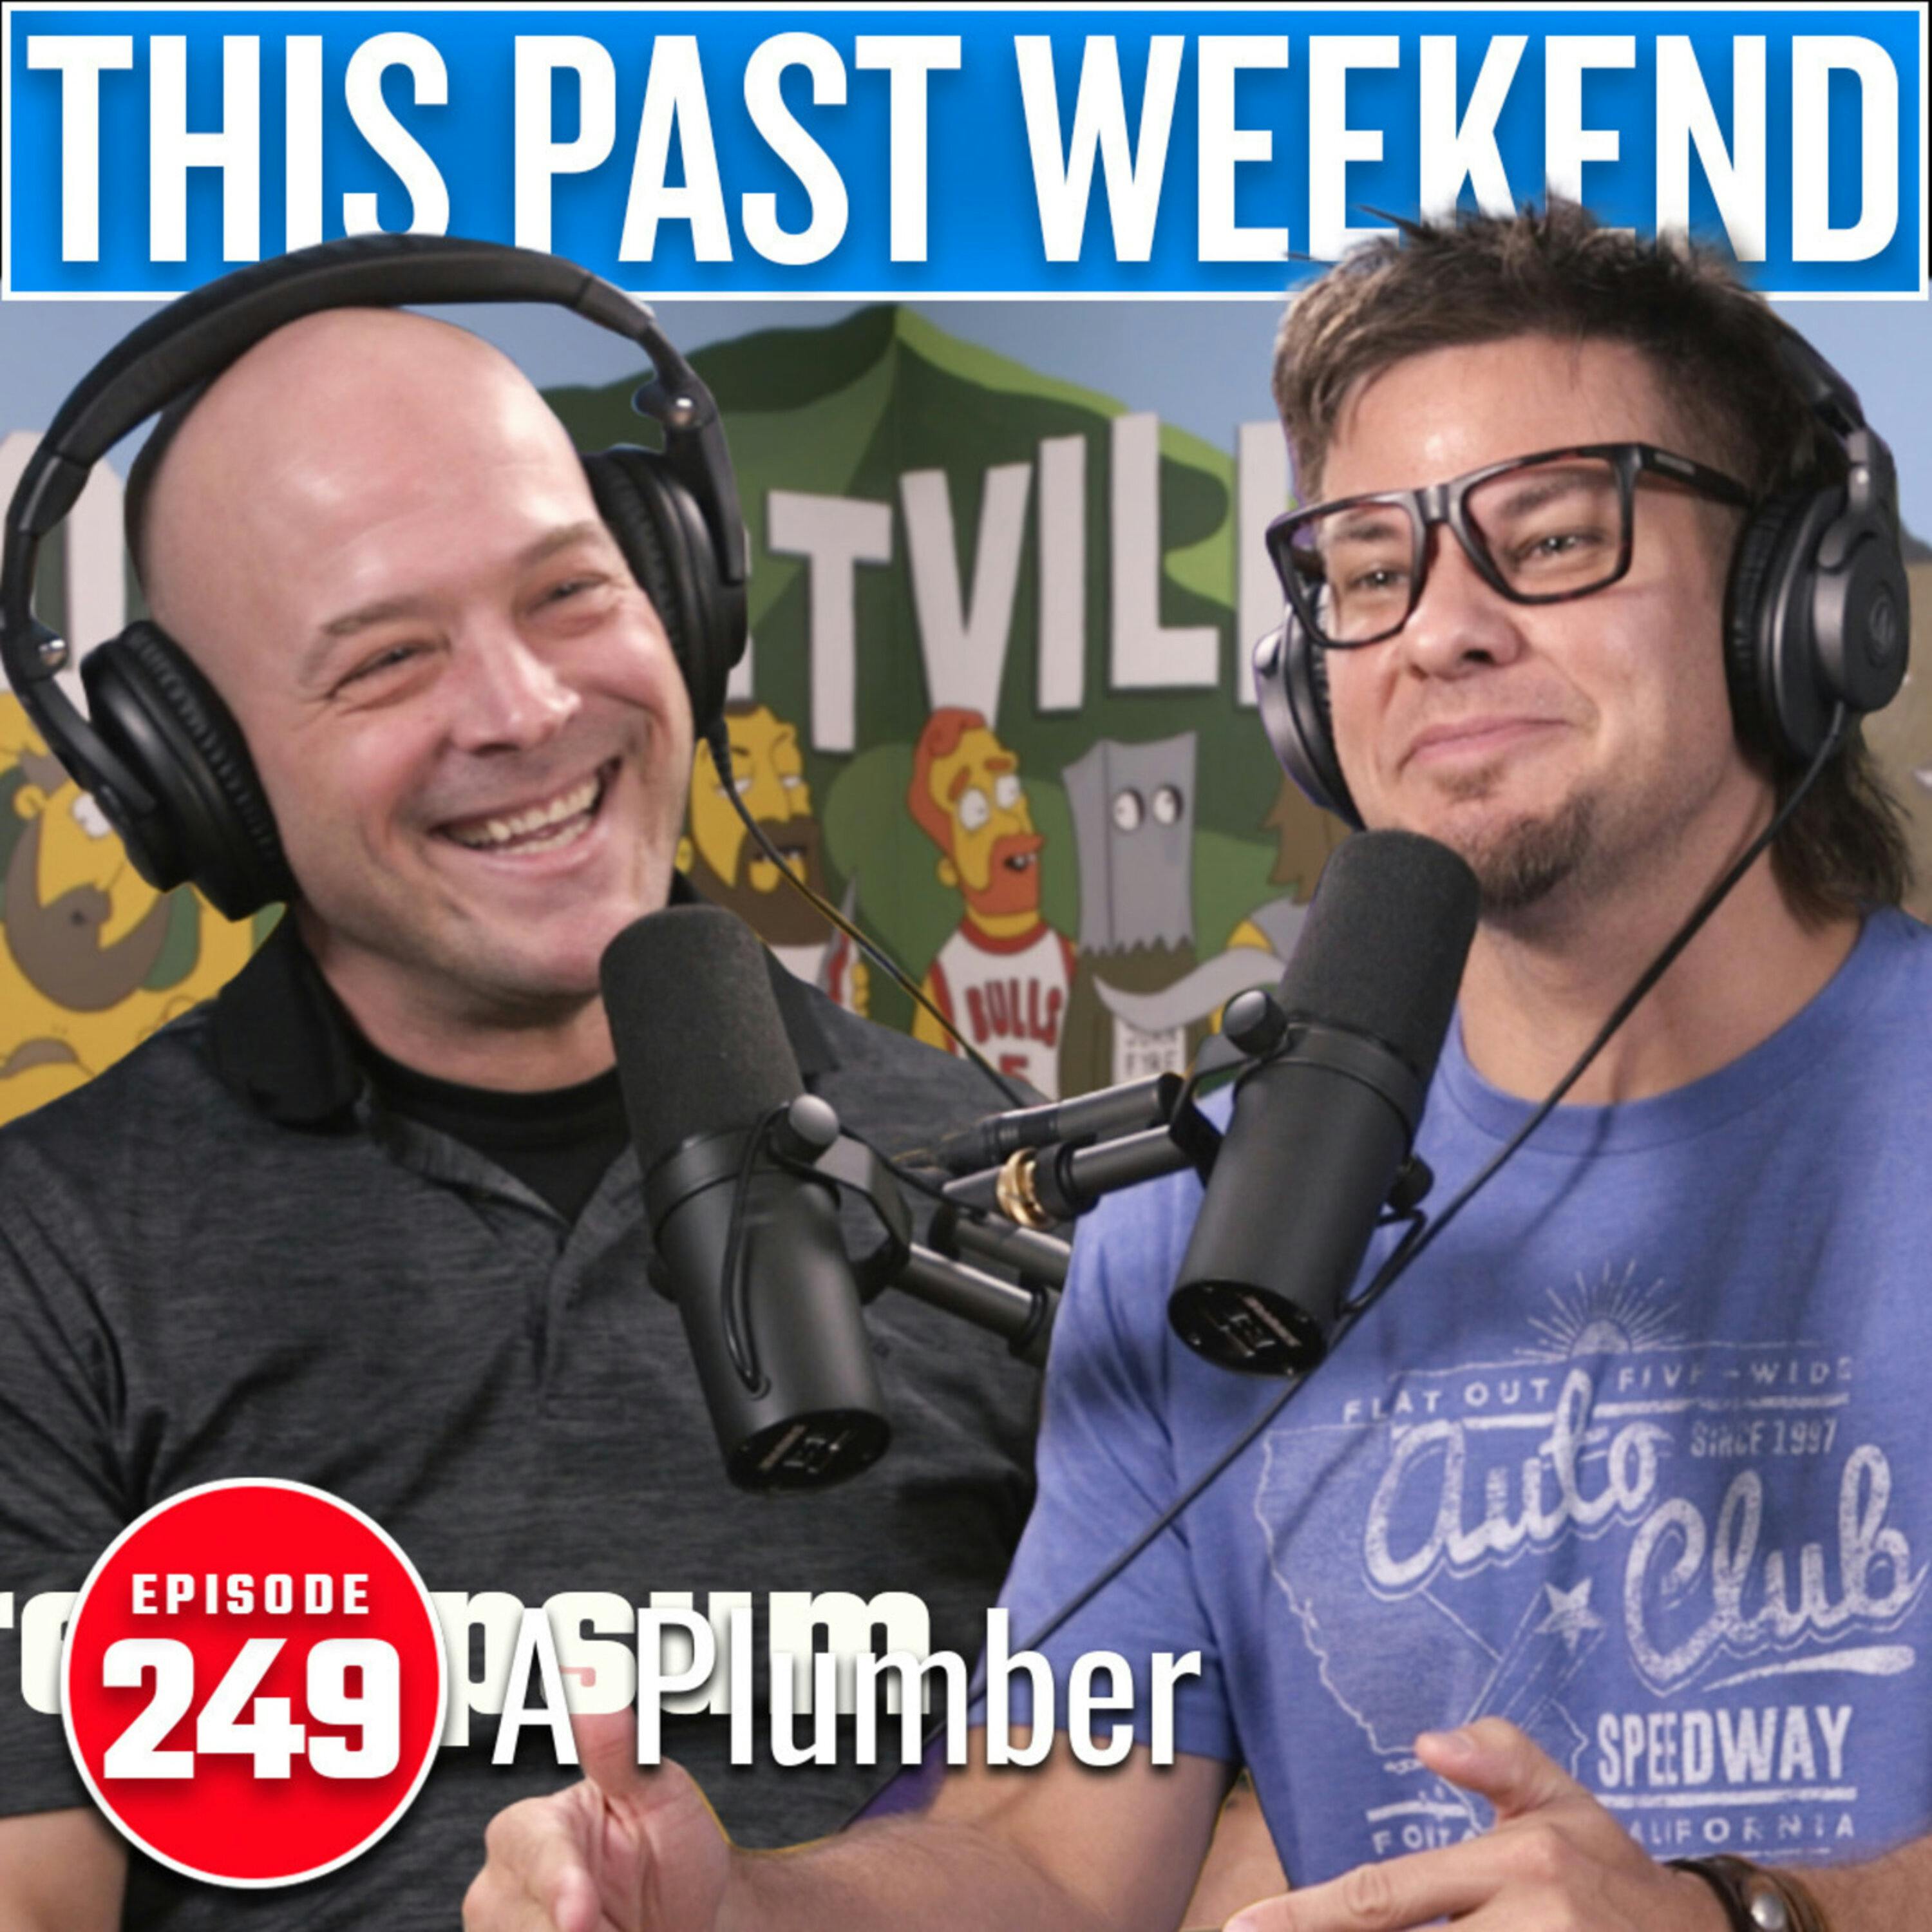 A Plumber | This Past Weekend #249 by Theo Von